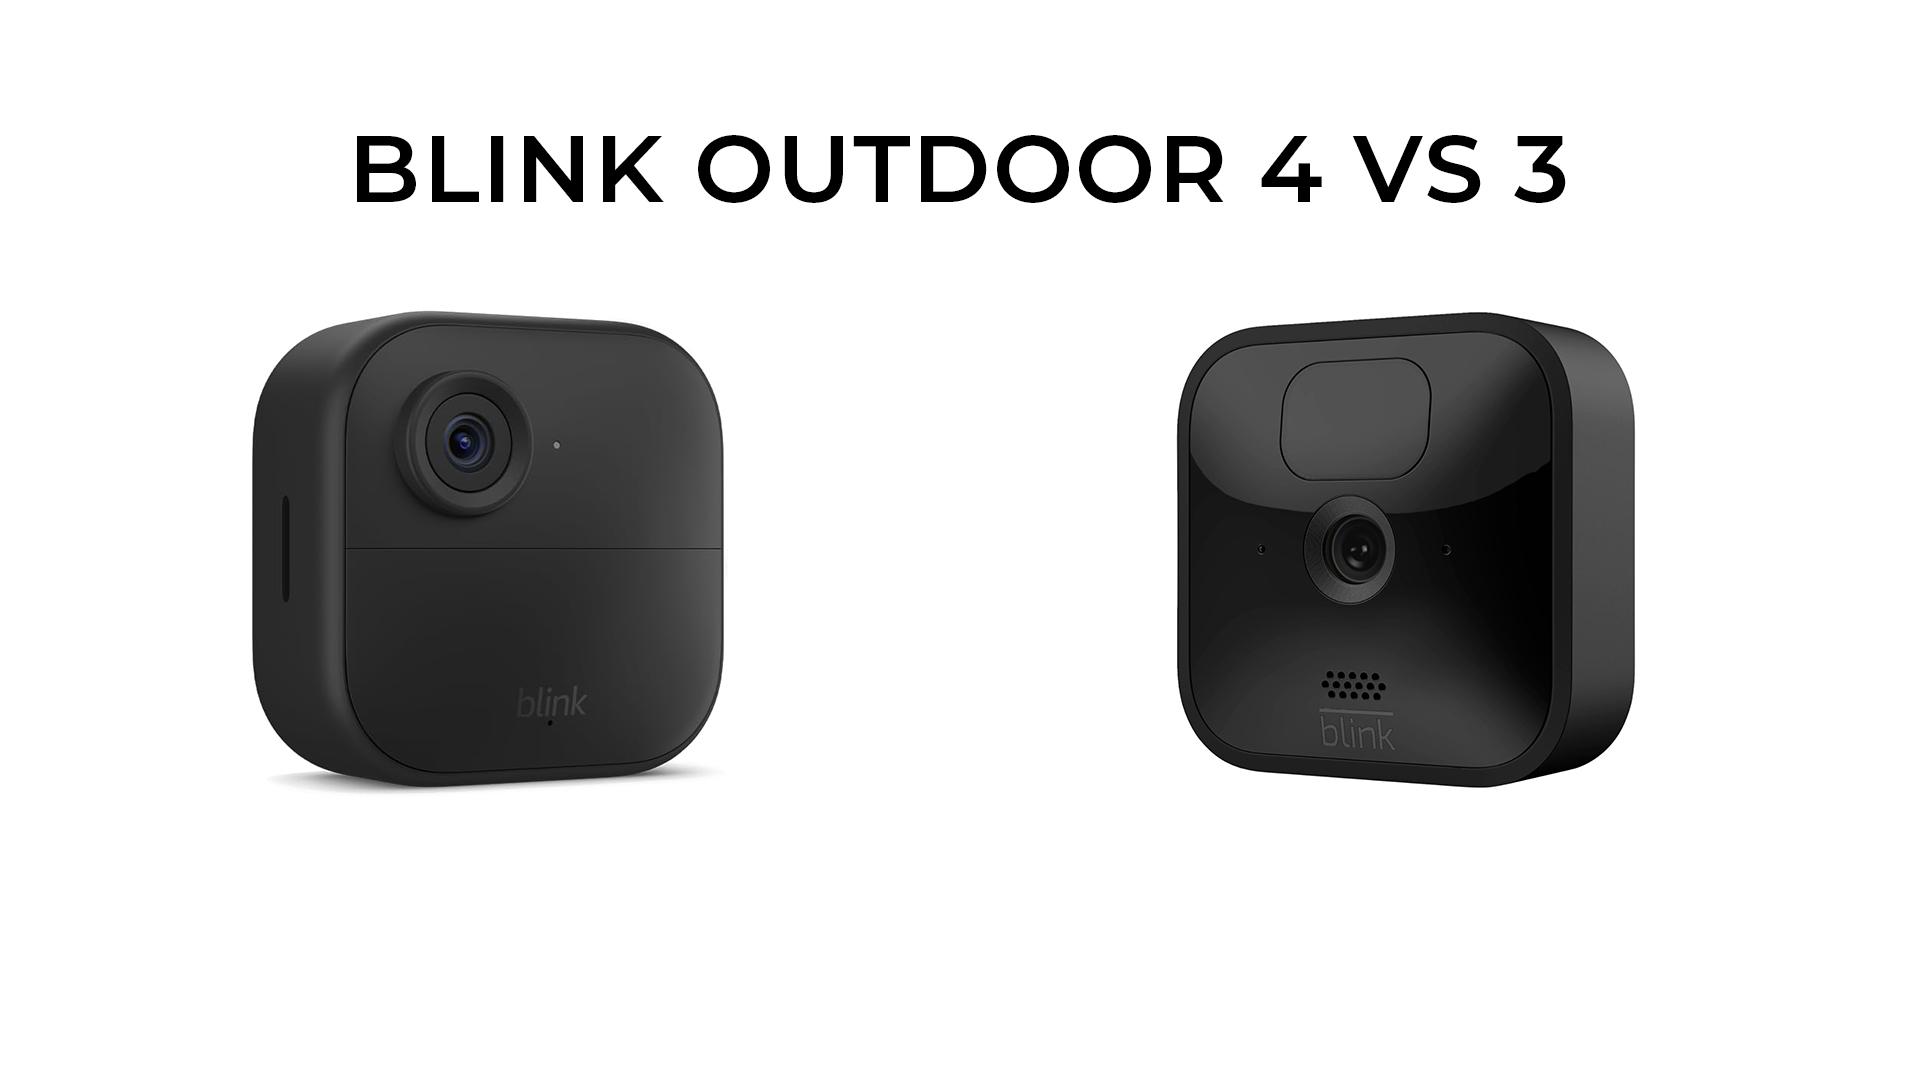 Blink Outdoor 4 vs 3: Which is Better Right for You?